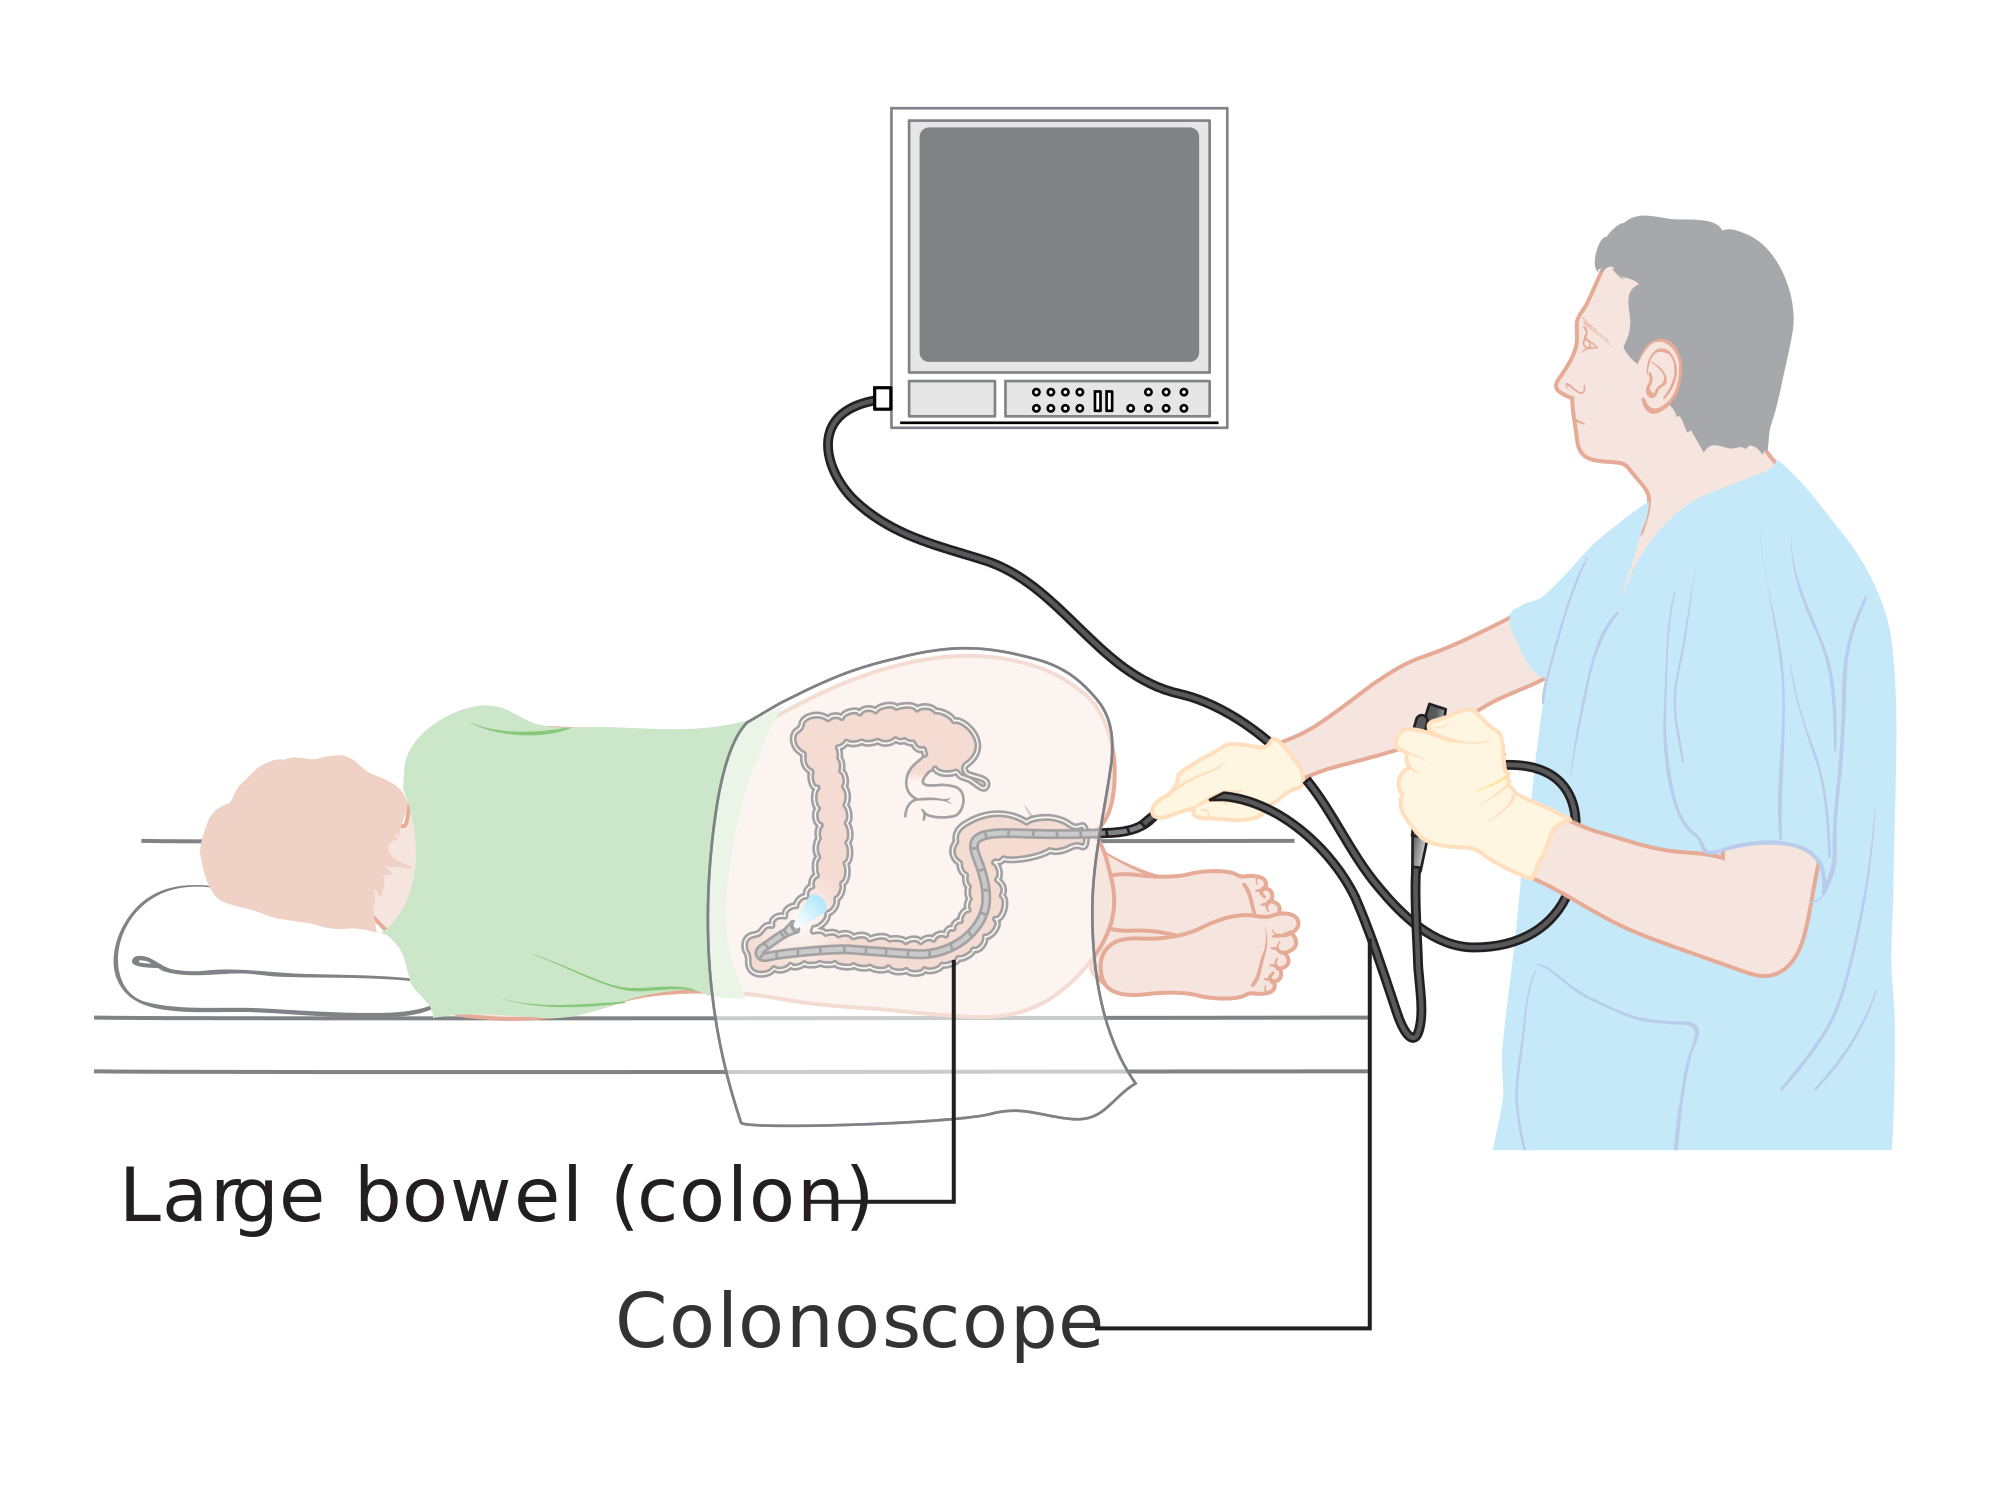 Retrograde colonoscopy of the entire colon was successfully administered by Dr. William Wolff and his associates.11Wolff, W.I. "Colonoscopy: History and Development." American Journal of Gastroenterology. 84 (1989): 1017-1025. [PUBMED]      